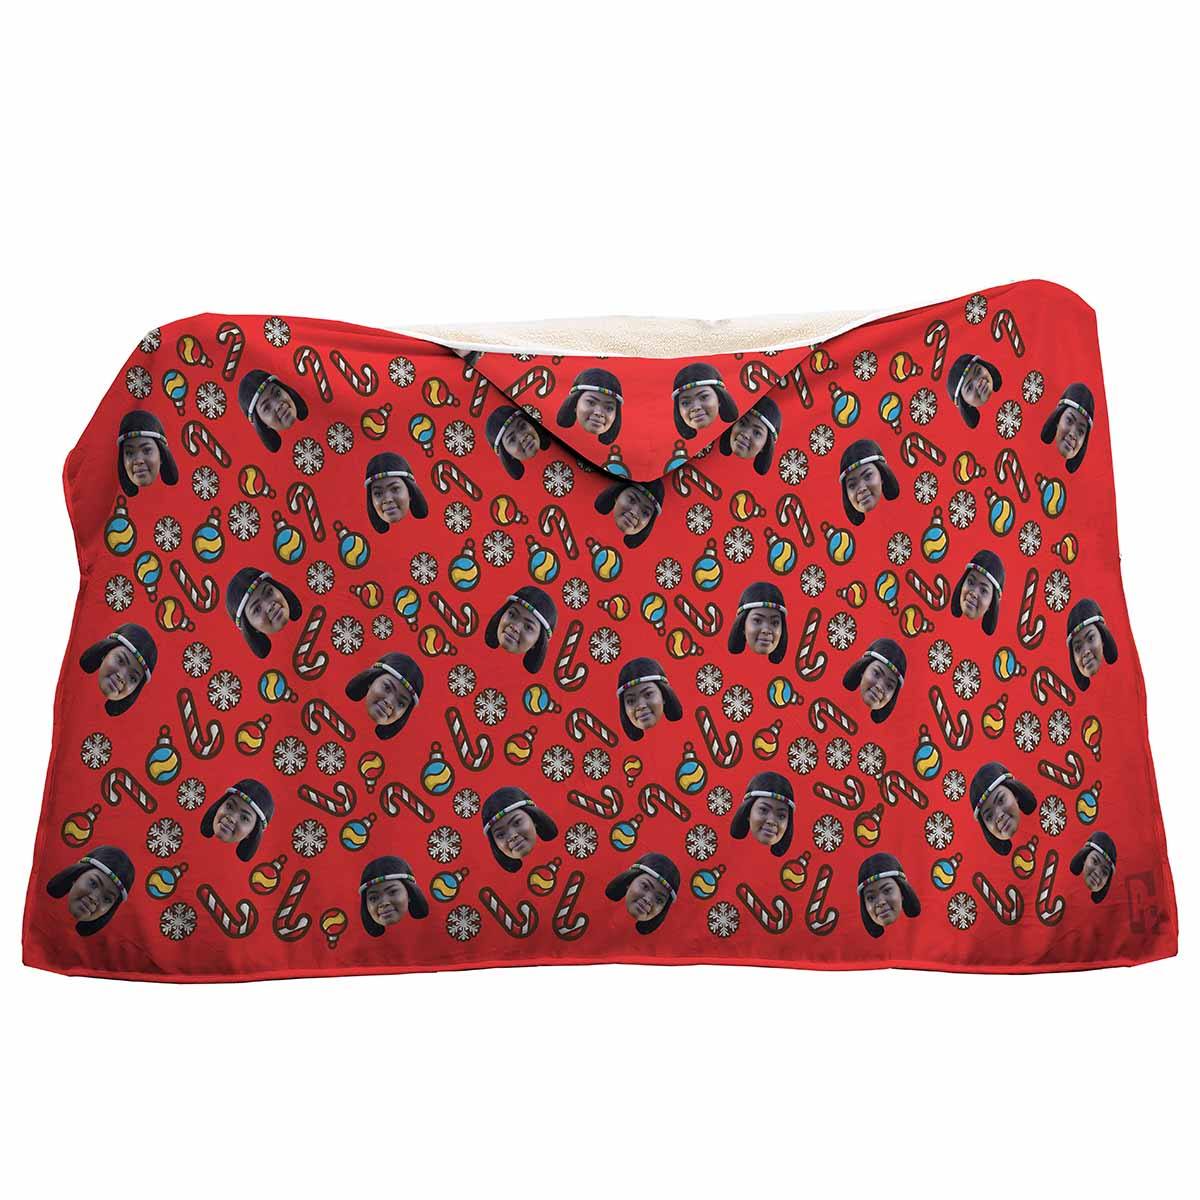 red Christmas Tree Toy hooded blanket personalized with photo of face printed on it